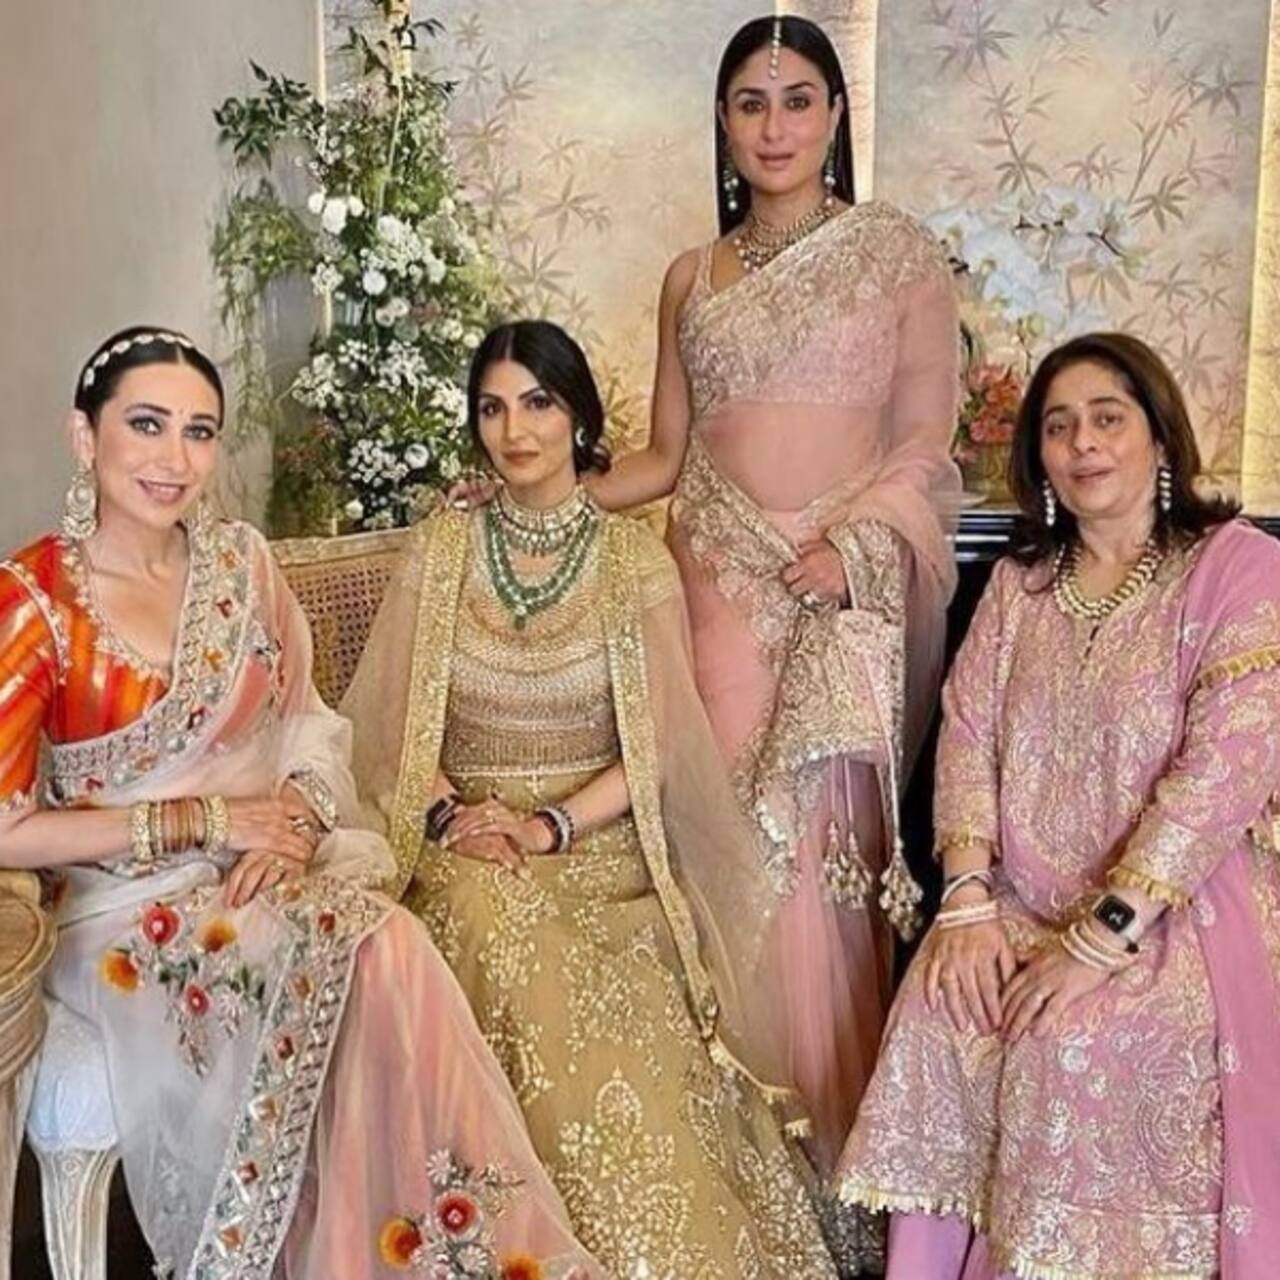 The Kapoor sisters' picture